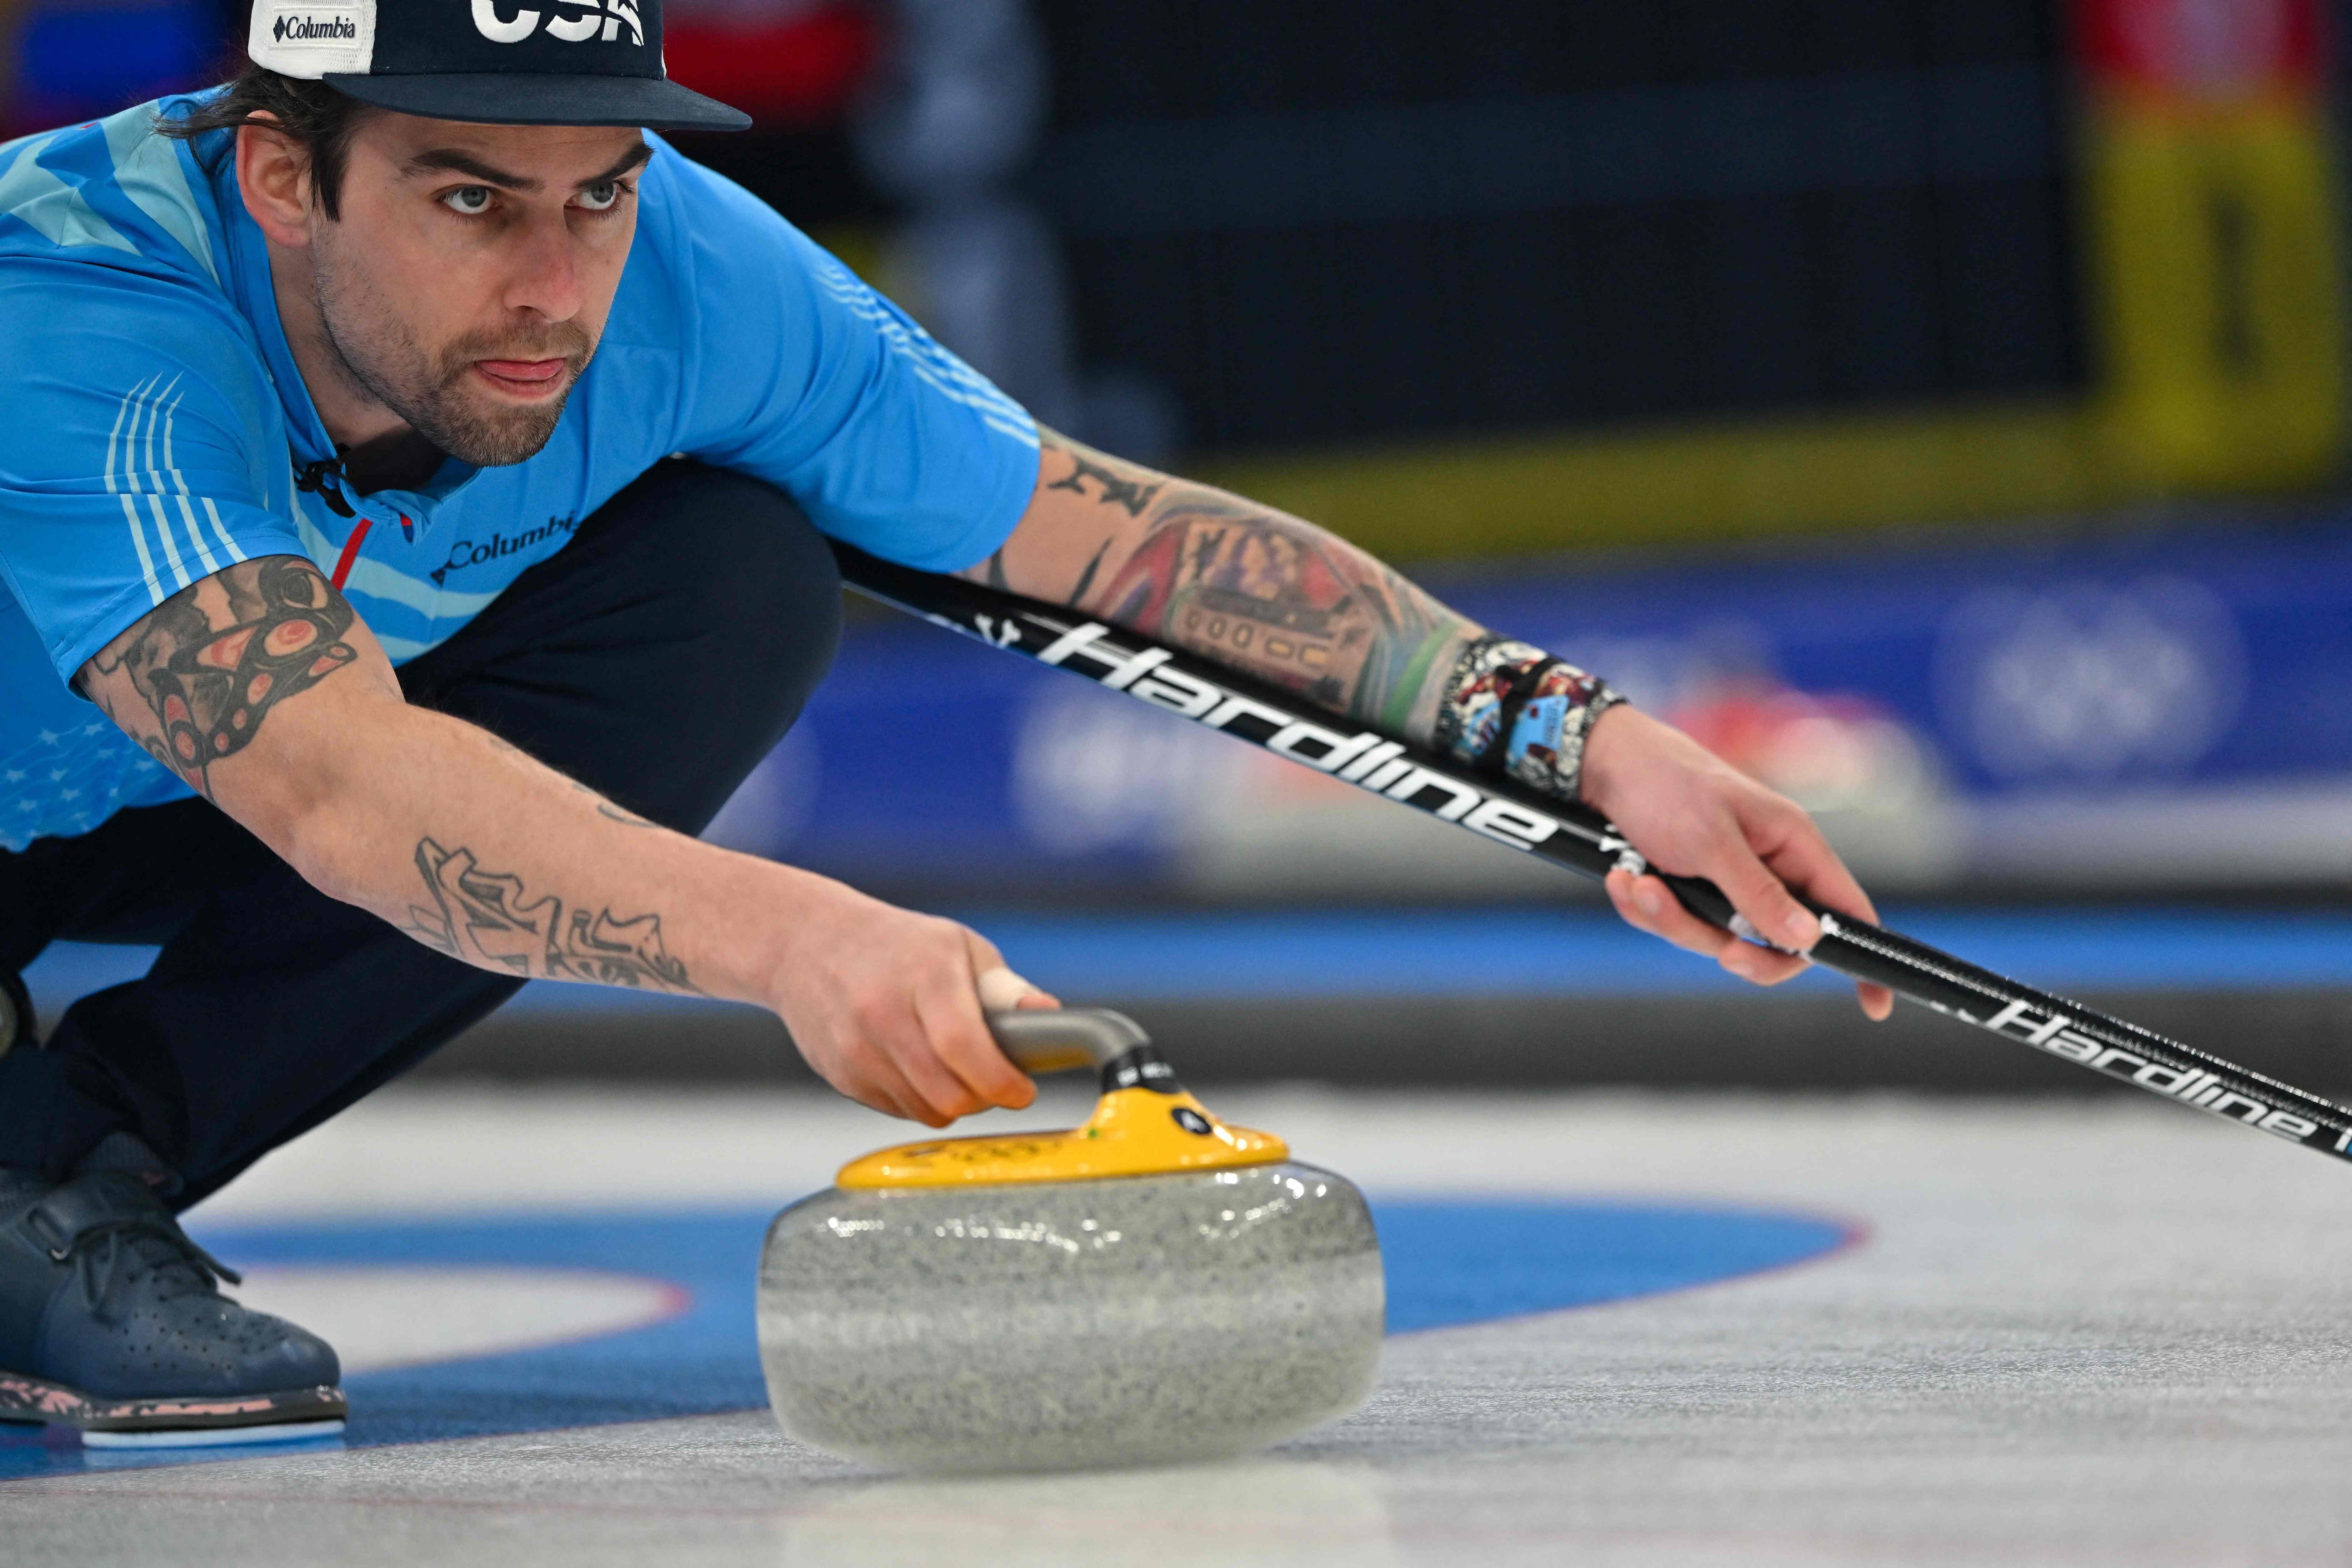 Chris Plys Gets Olympic Curling Dream Job For 22 Winter Games